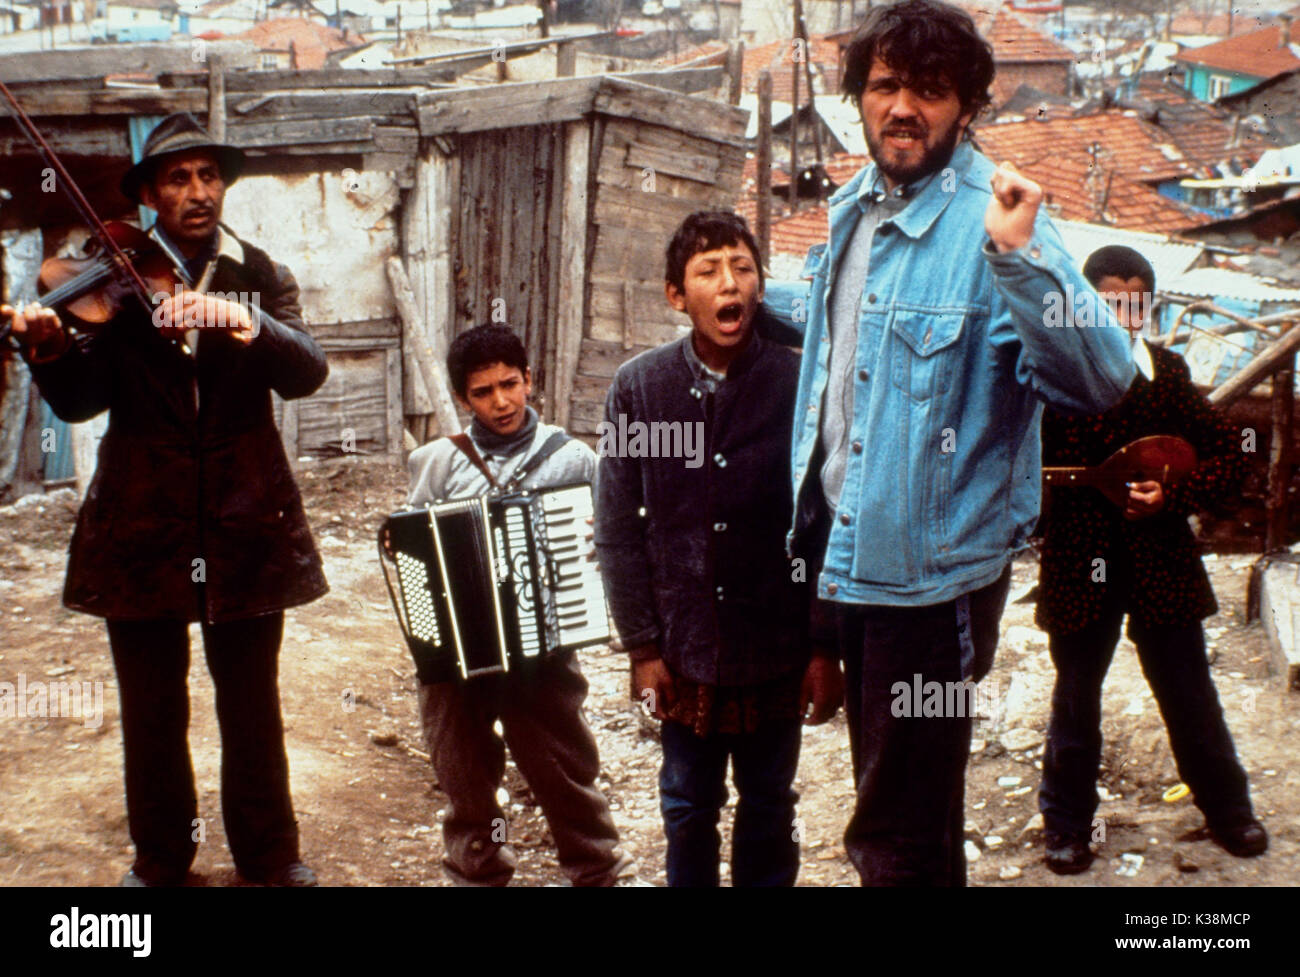 EMIR KUSTURICA DIRECTING THE TIME OF THE GYPSIES      Date: 1988 Stock Photo